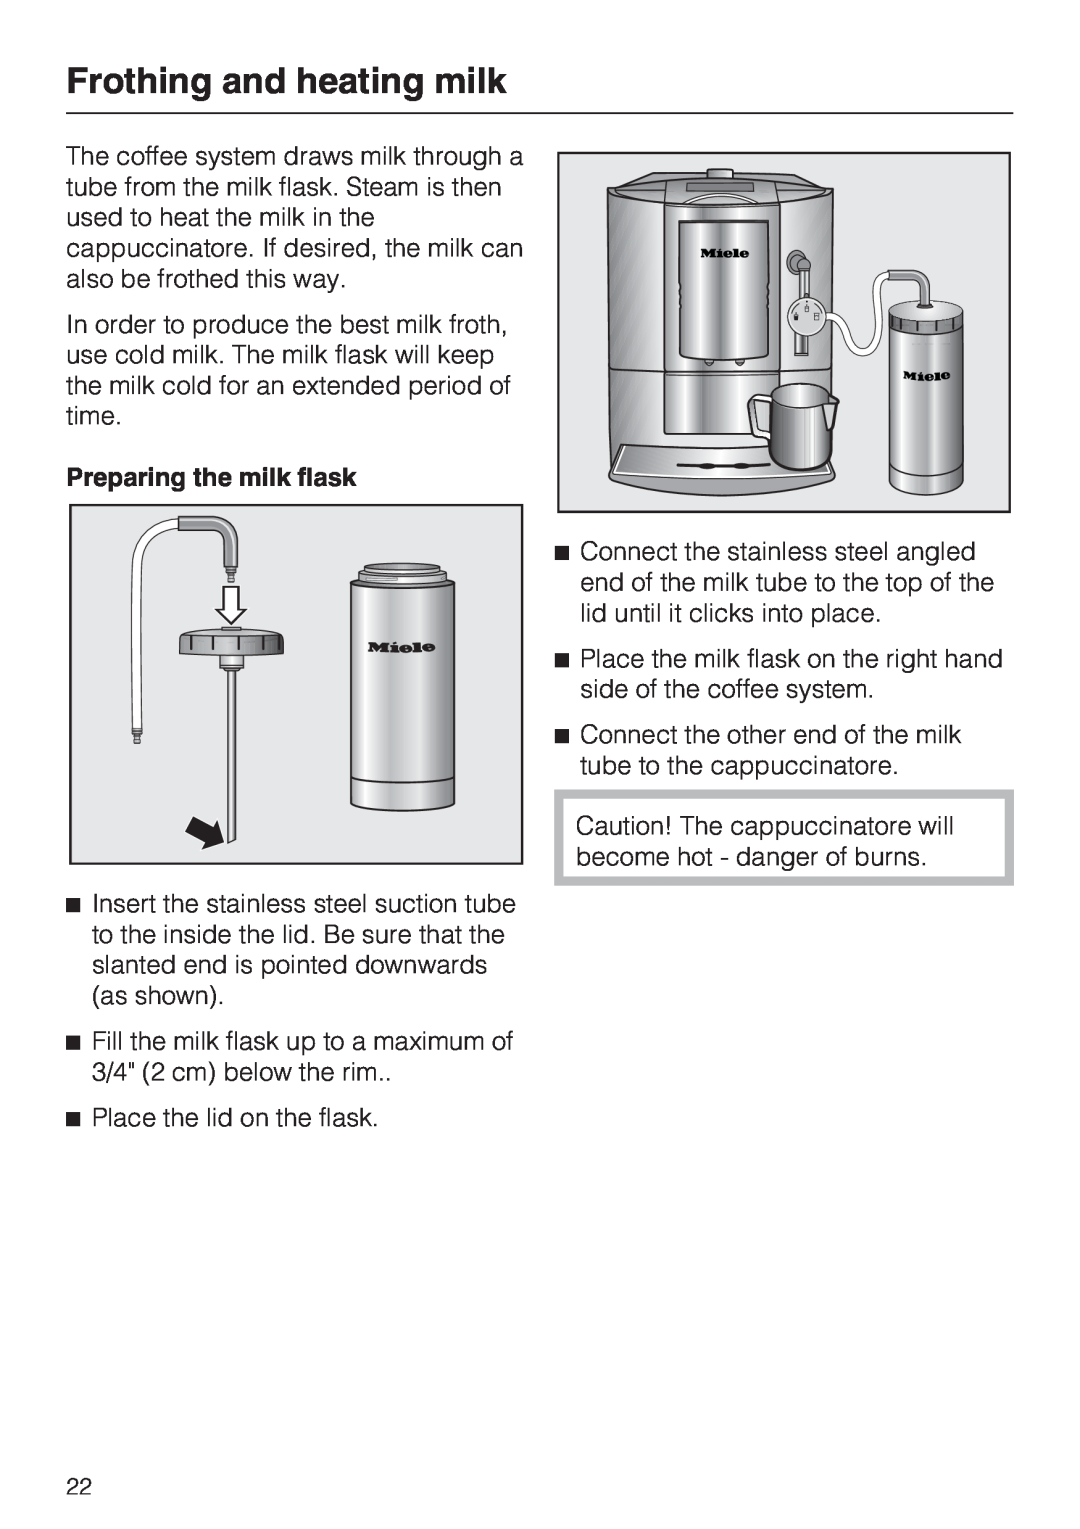 Miele CM 5100, 7995311 manual Frothing and heating milk, Preparing the milk flask 